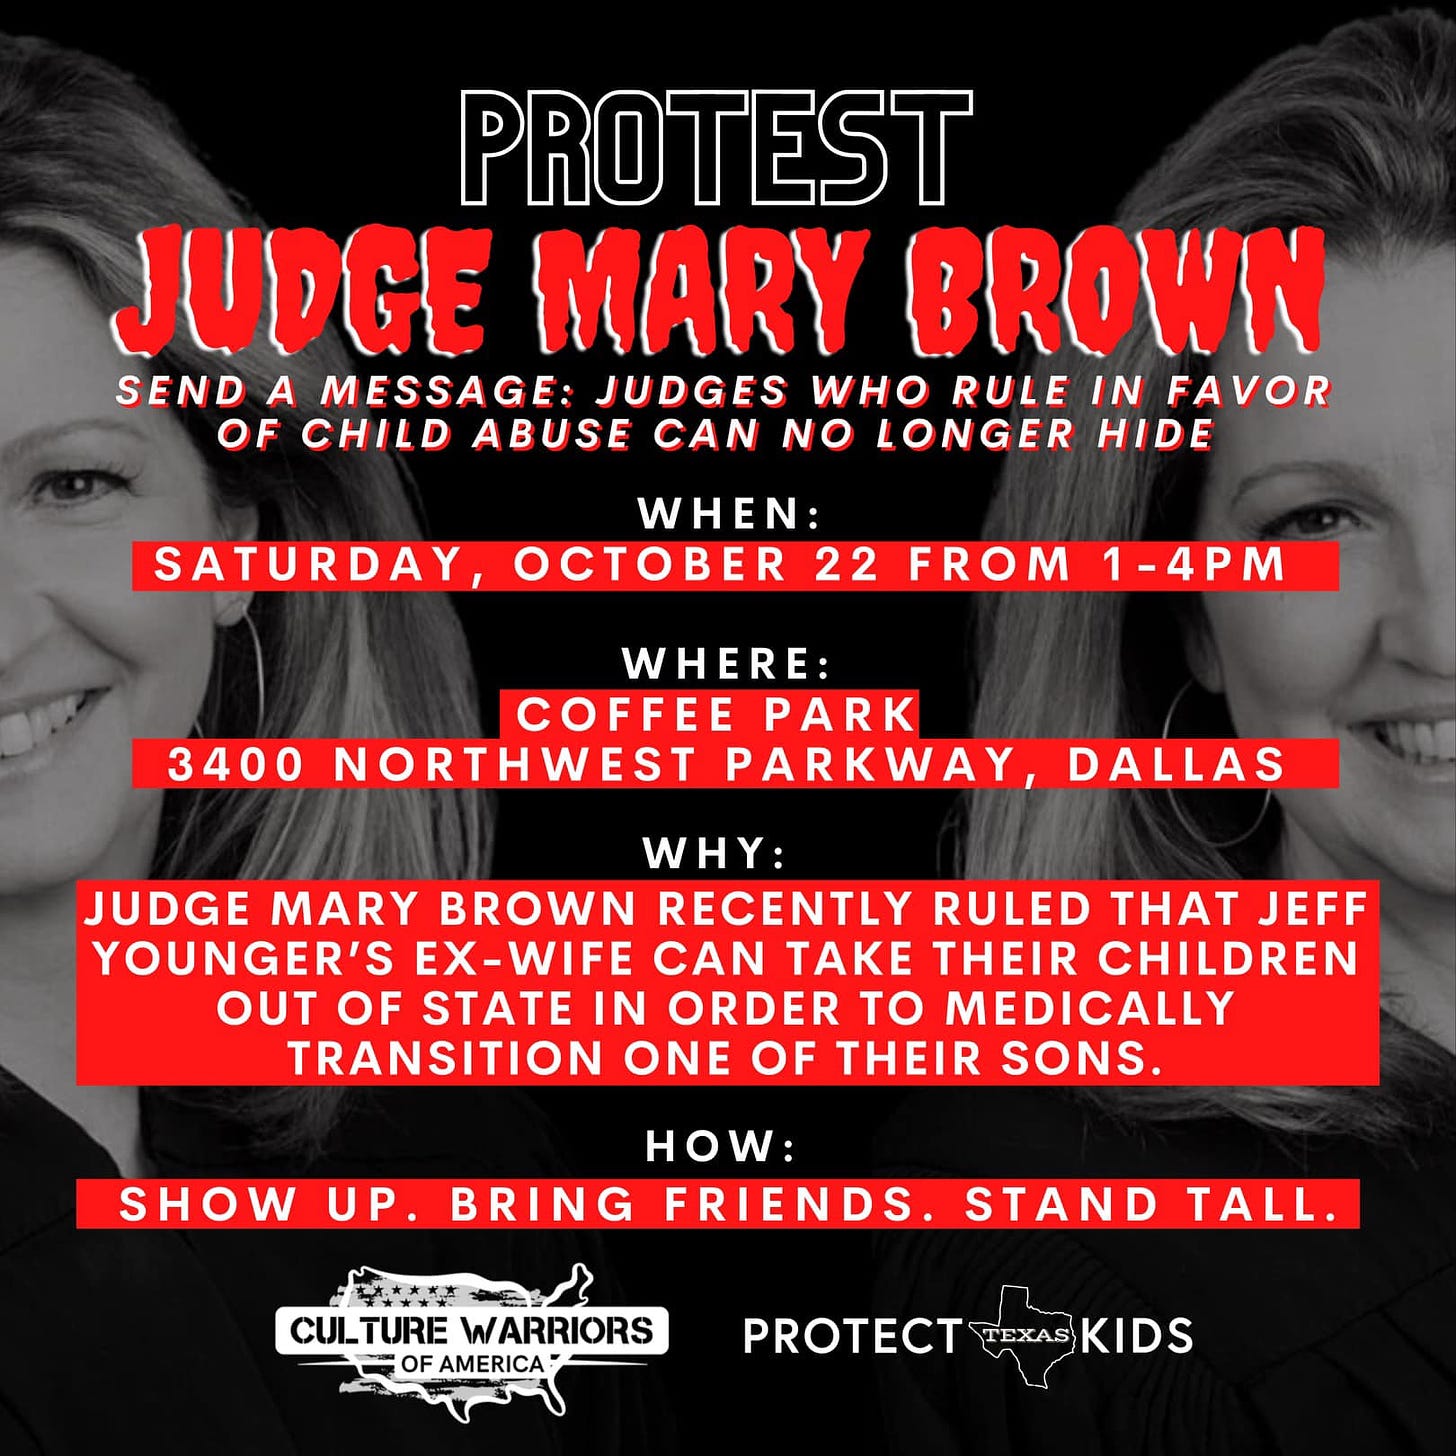 May be an image of 2 people and text that says 'PROTEST JUDGE MARY BROWN SENDA MESSAGE: JUDGES WHO RULE IN FAVOR OF CHILD ABUSE CAN NO LONGER HIDE WHEN: SATURDAY, OCTOBER 22 FROM 1-4PM WHERE: COFFEE PARK 3400 NORTHWEST PARKWAY DALLAS WHY: JUDGE MARY BROWN RECENTLY RULED THAT JEFF YOUNGER'S EX-WIFE CAN TAKE THEIR CHILDREN OUT OF STATE IN ORDER TO MEDICALLY TRANSITION ONE OF THEIR SONS. SHOW UP. HOW: BRING FRIENDS. STAND TALL. CUITURE WARRIORS AMERICA PROTECT TEXAS KIDS'